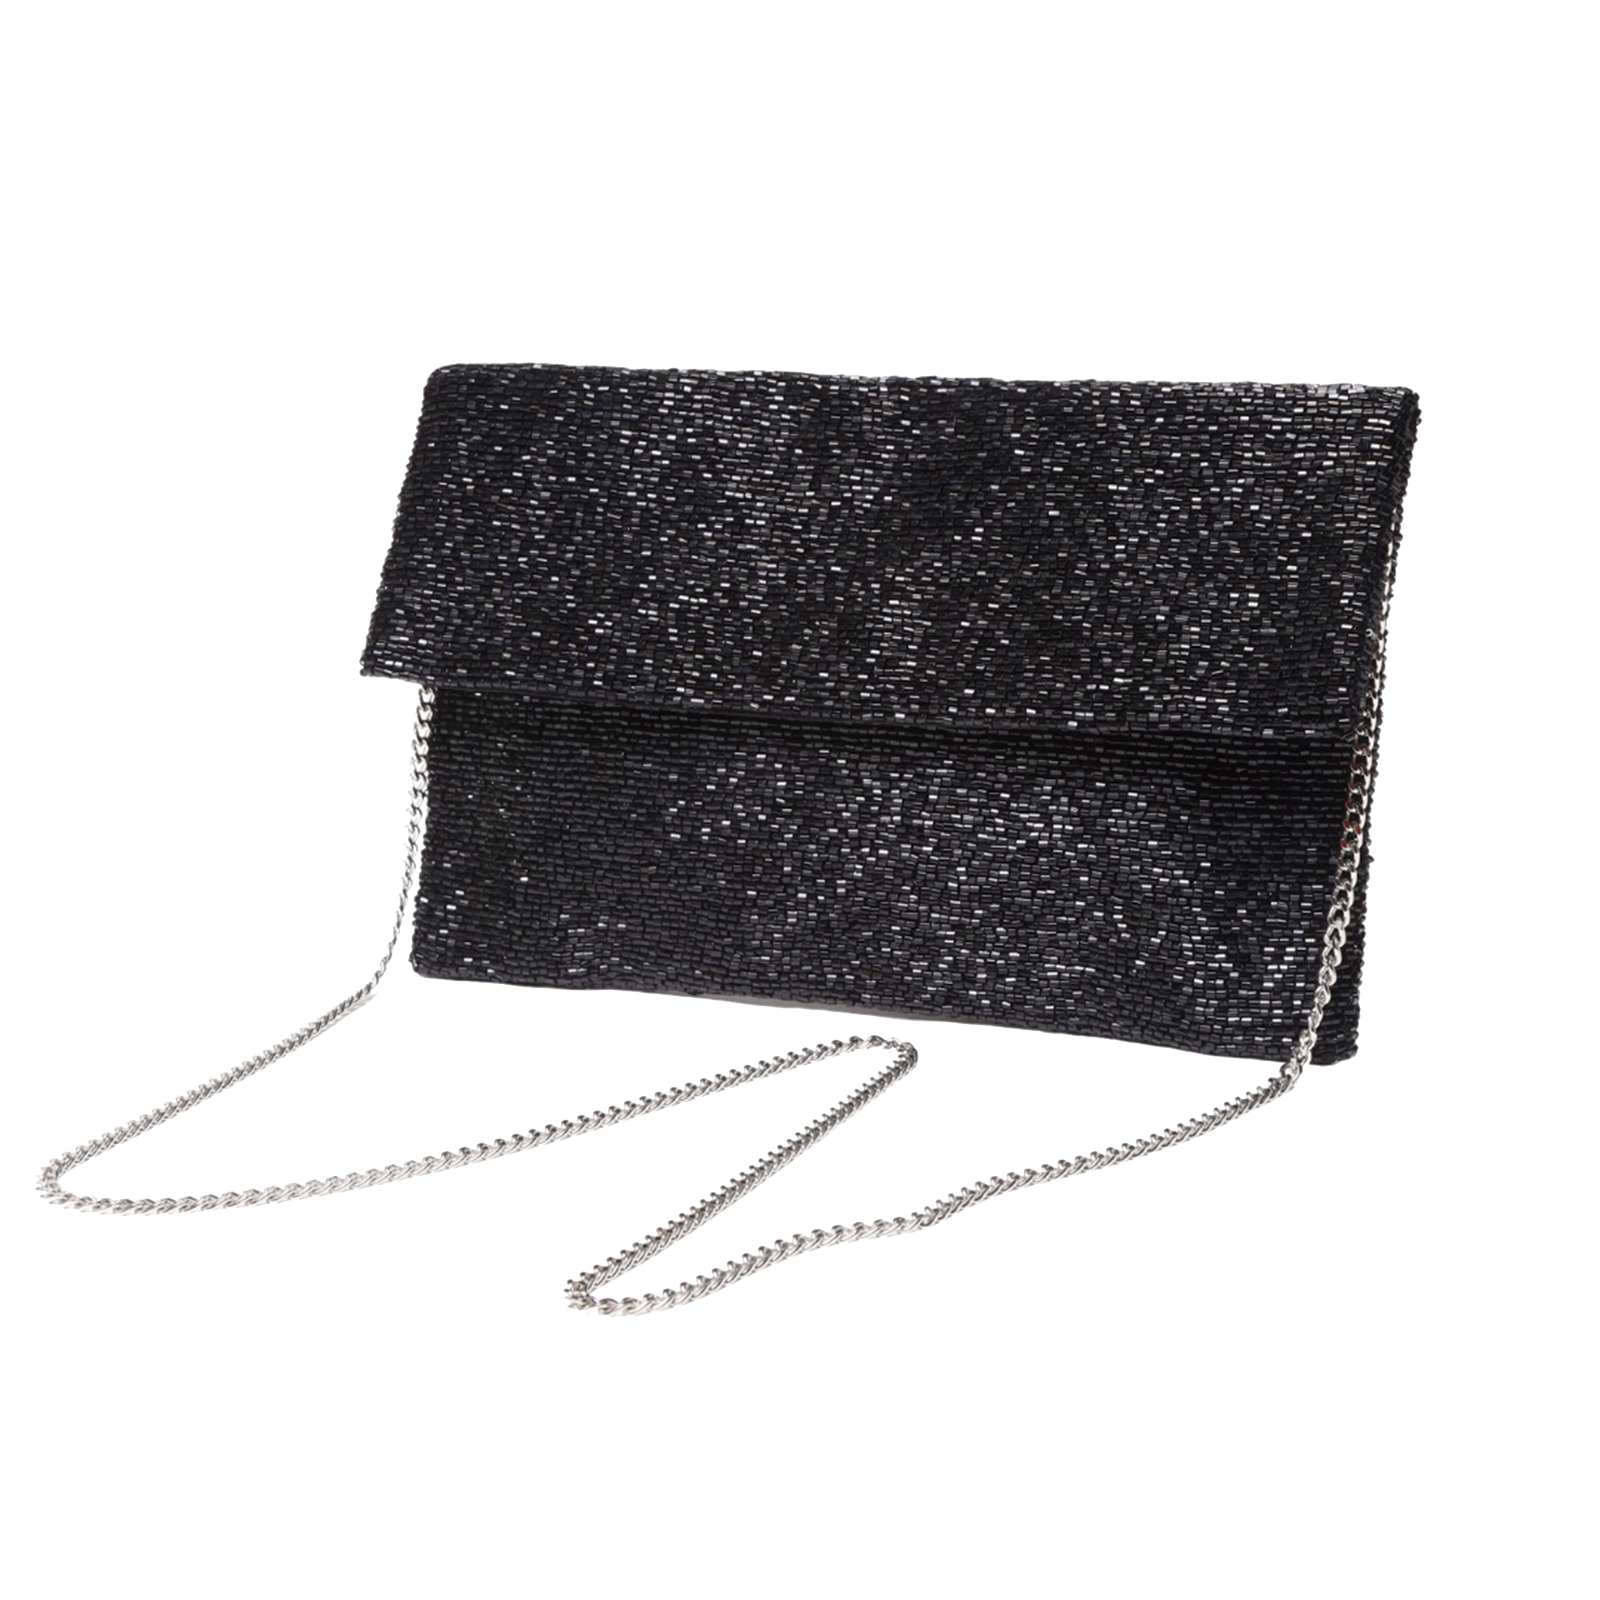 Beaded Half Flap Clutch with Chain Strap